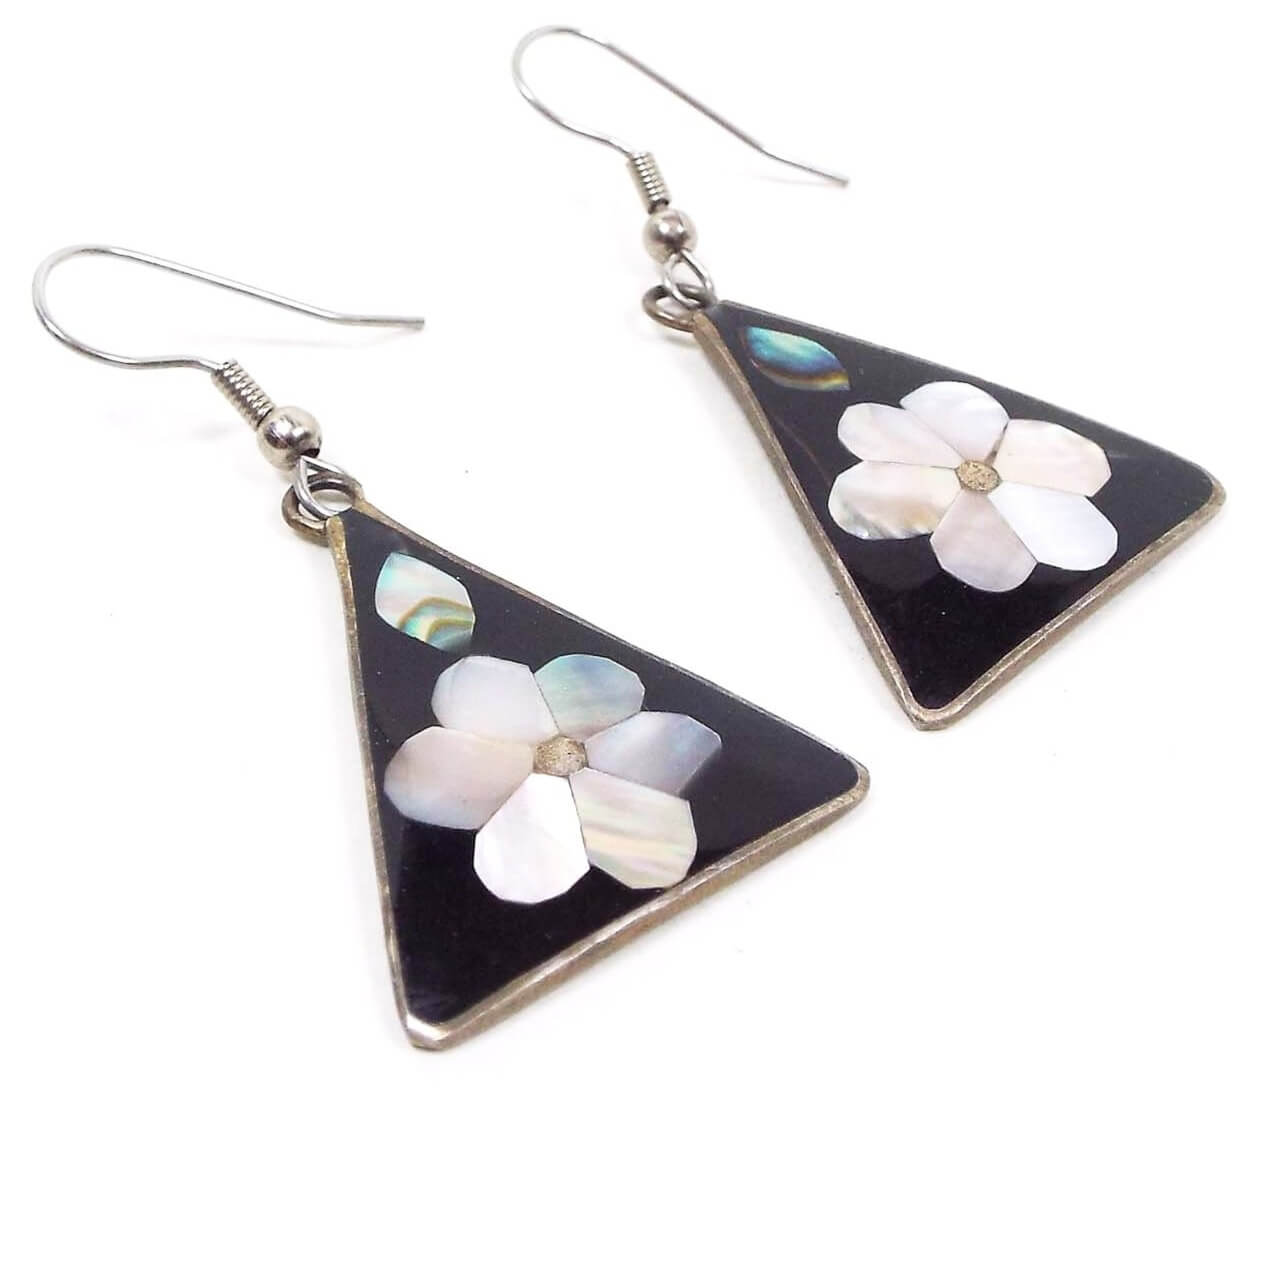 Front view of the retro vintage Southwestern floral earrings. The metal is silver tone in color. There are hook ear wires at the top and triangle drops at the bottom. The triangles are black enameled and have inlaid abalone shell leaves and mother of pearl petals for the flower design.